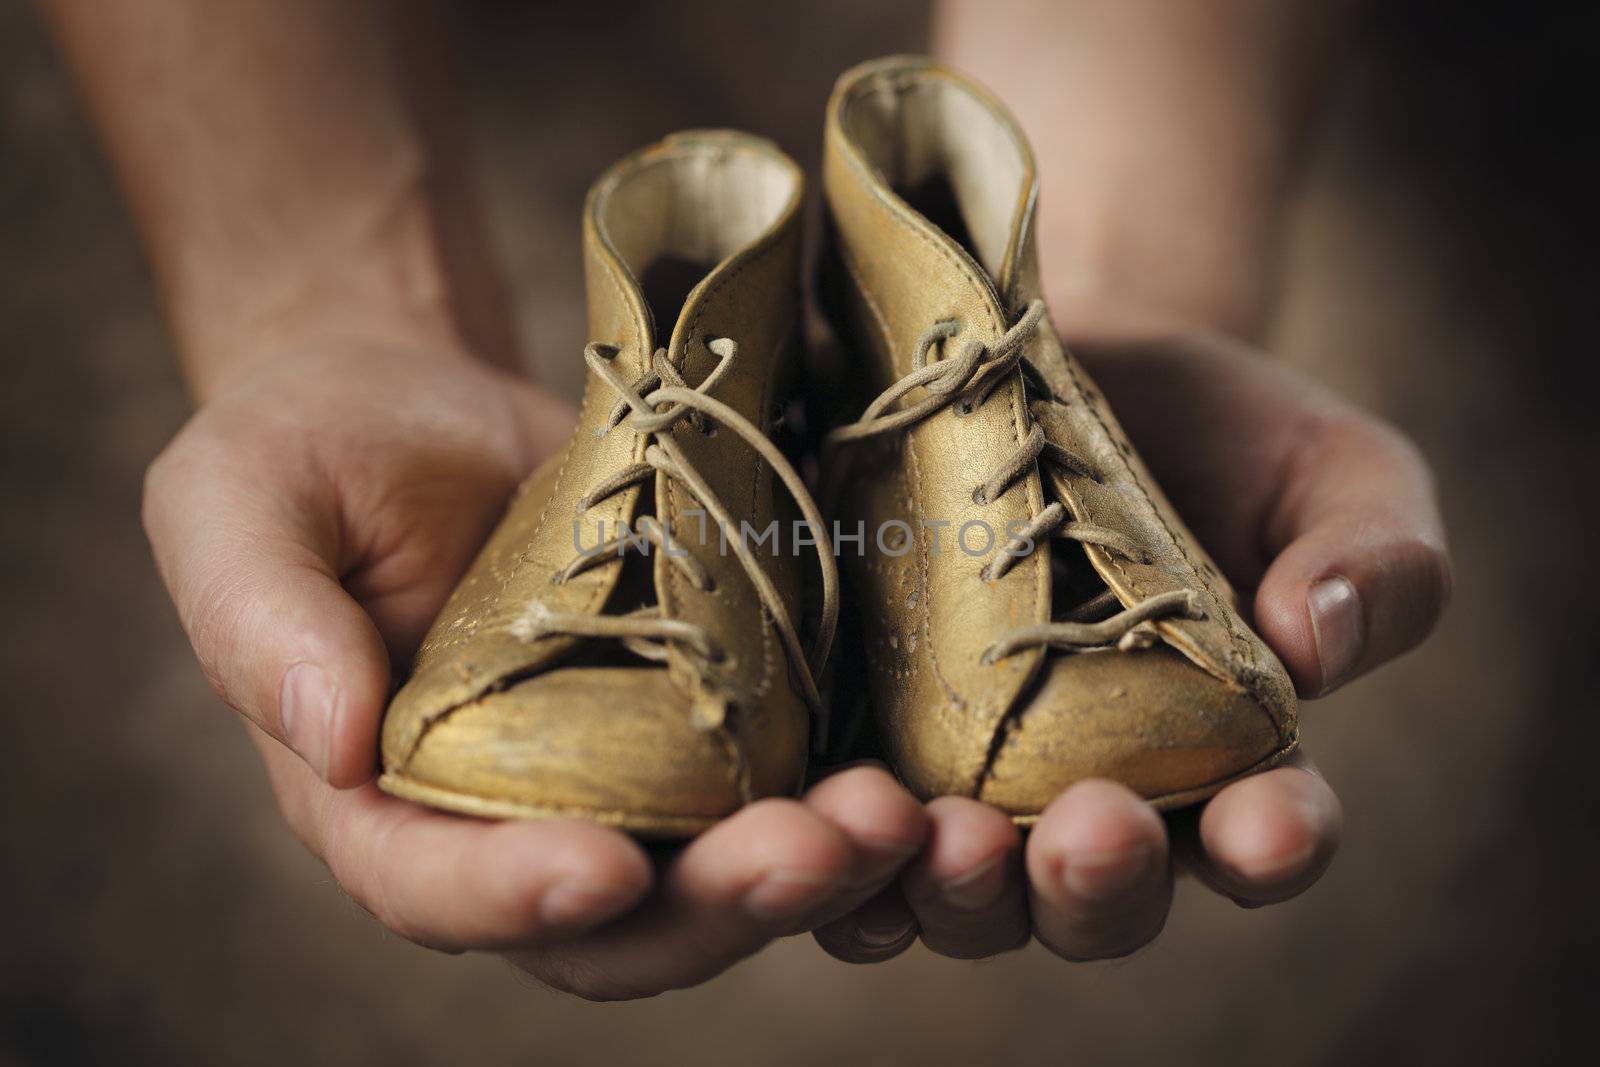 Man holding a pair of old baby shoes